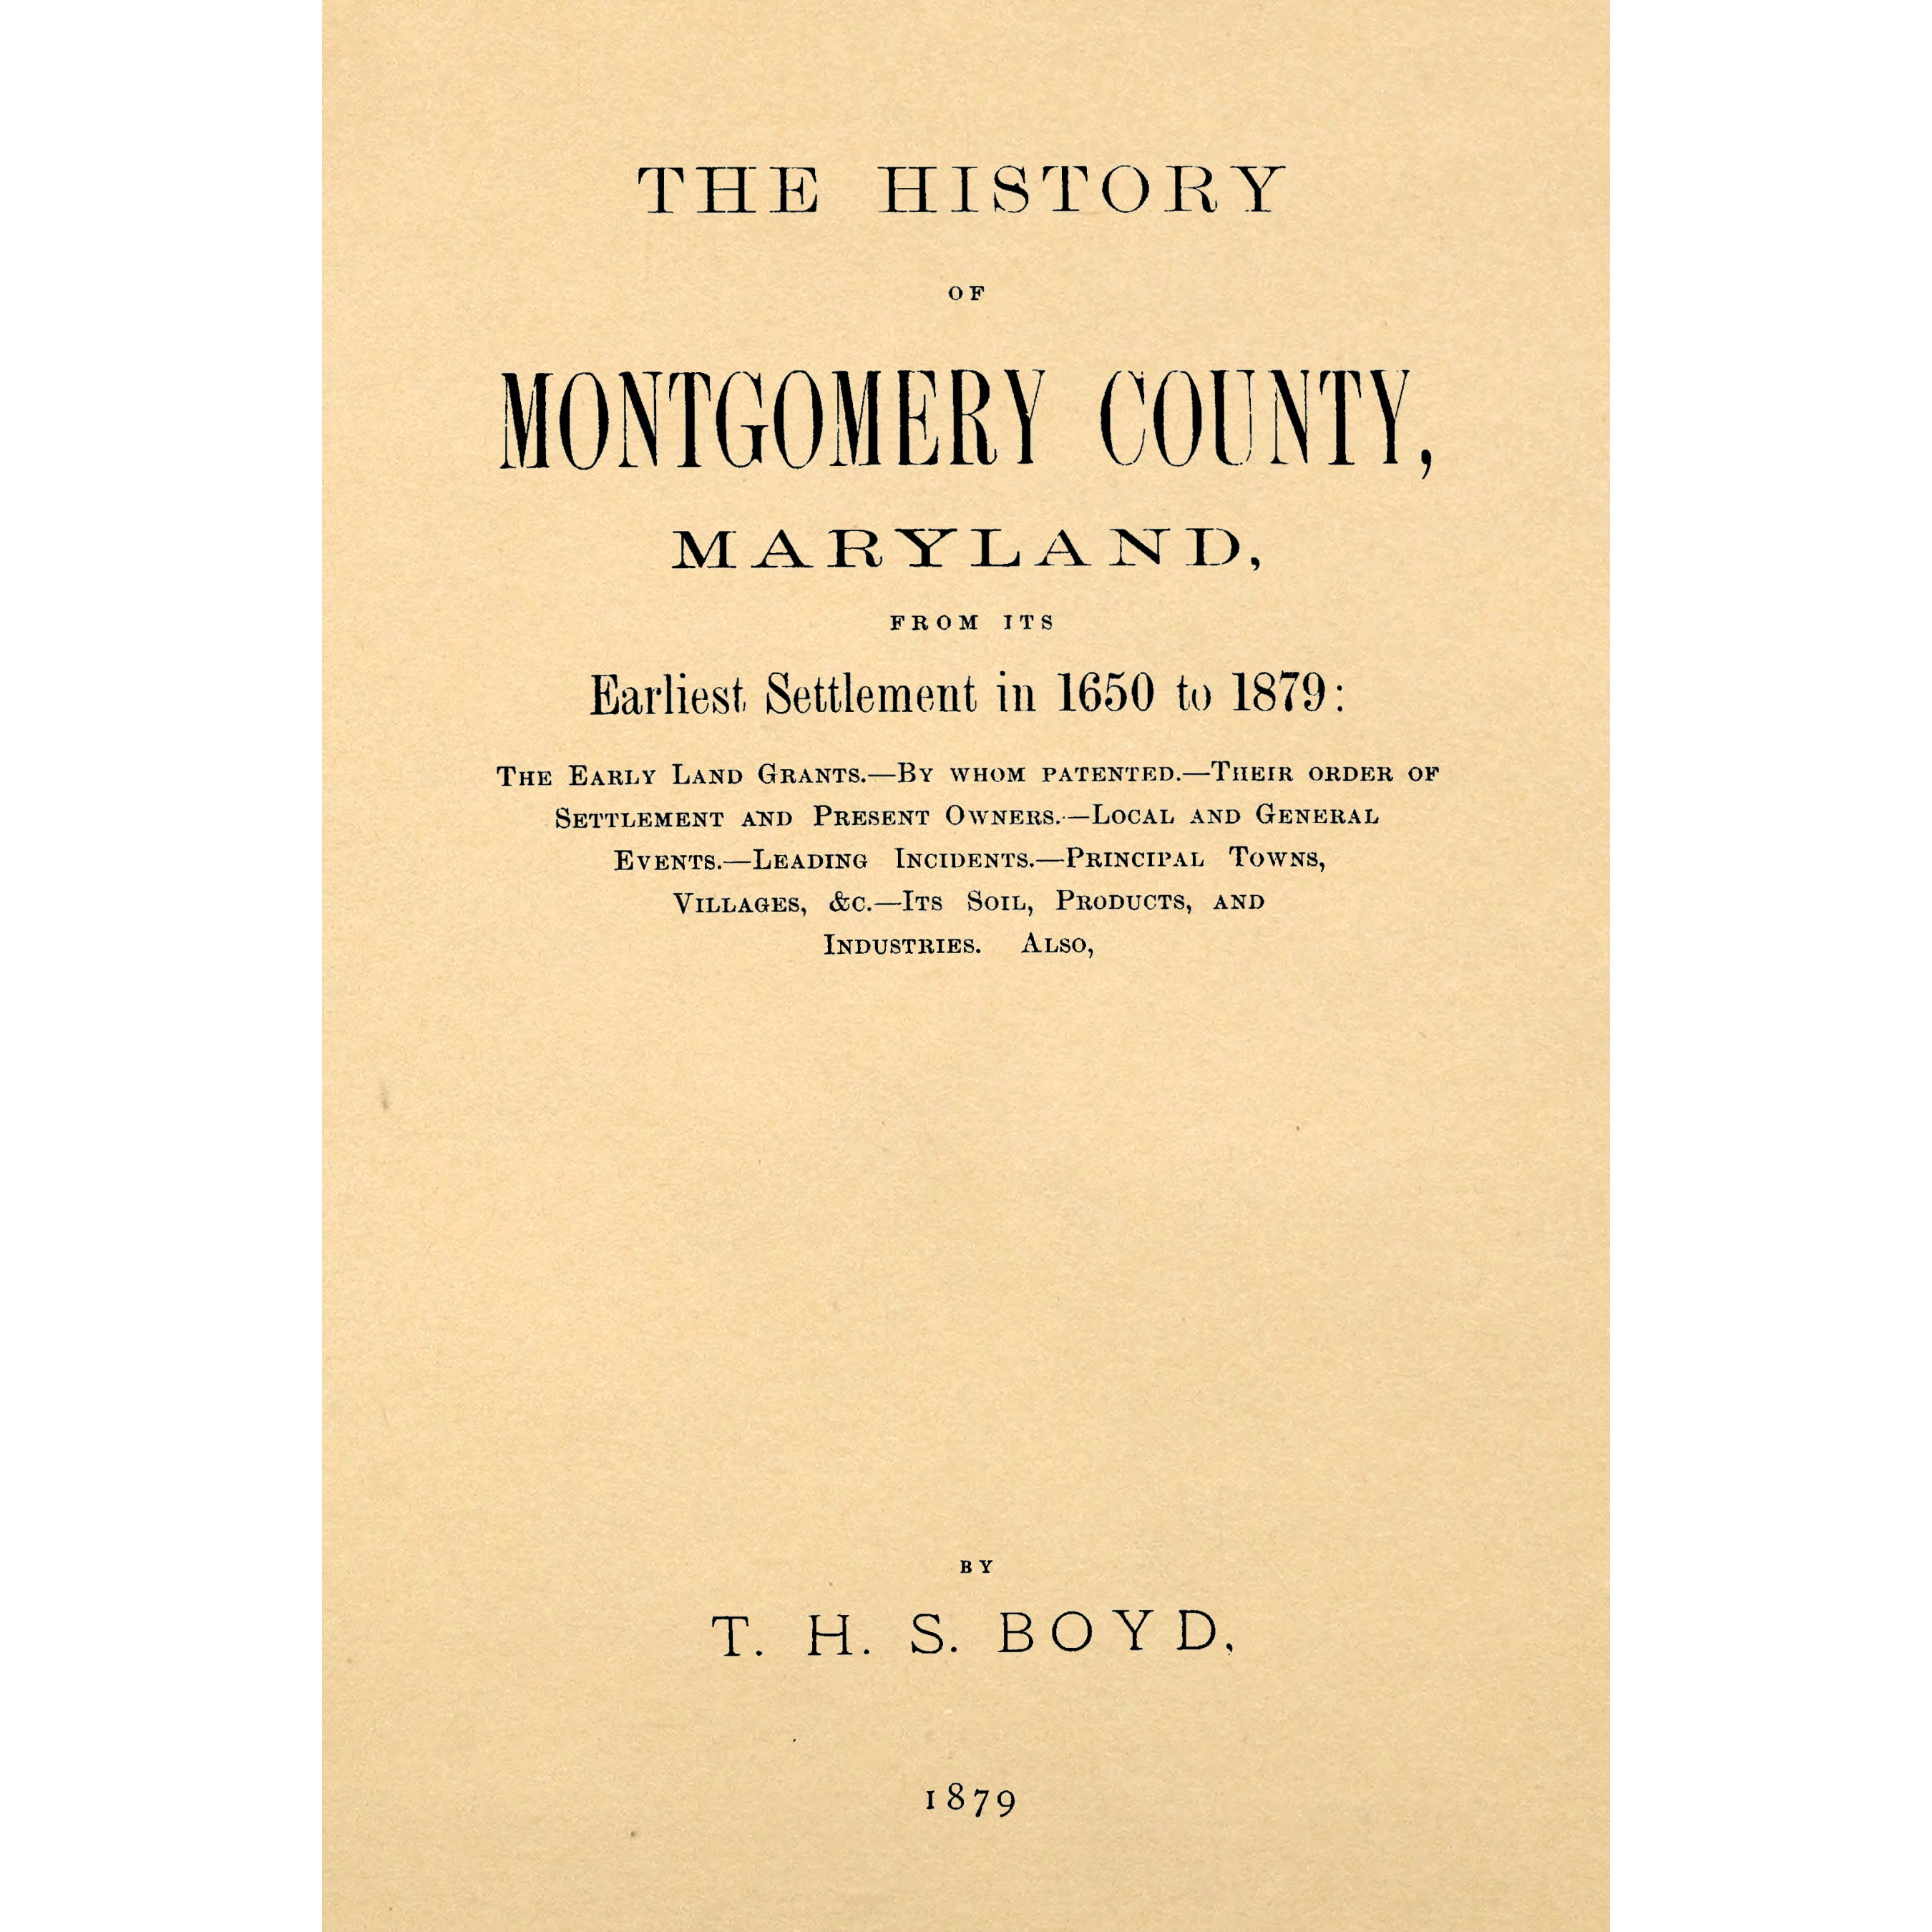 The history of Montgomery county, Maryland, from its earliest settlement in 1650 to 1879